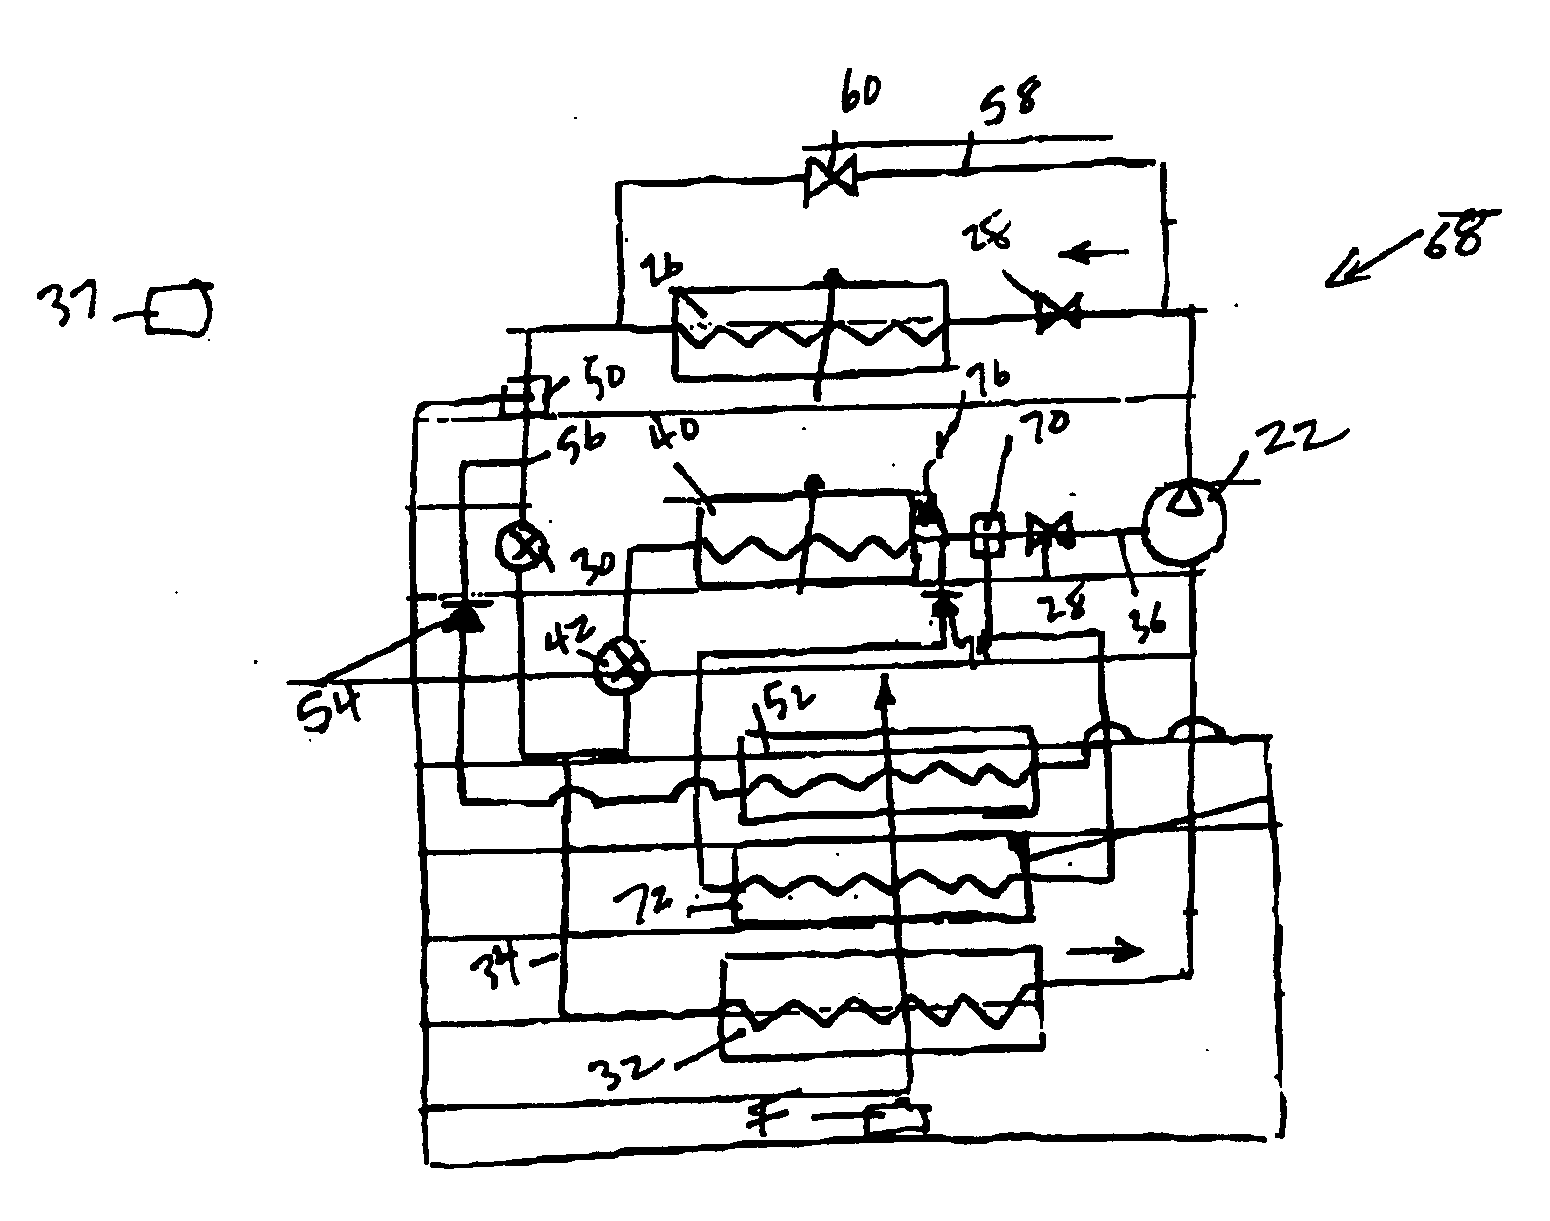 Dehumidification system with multiple condensers and compound compressor